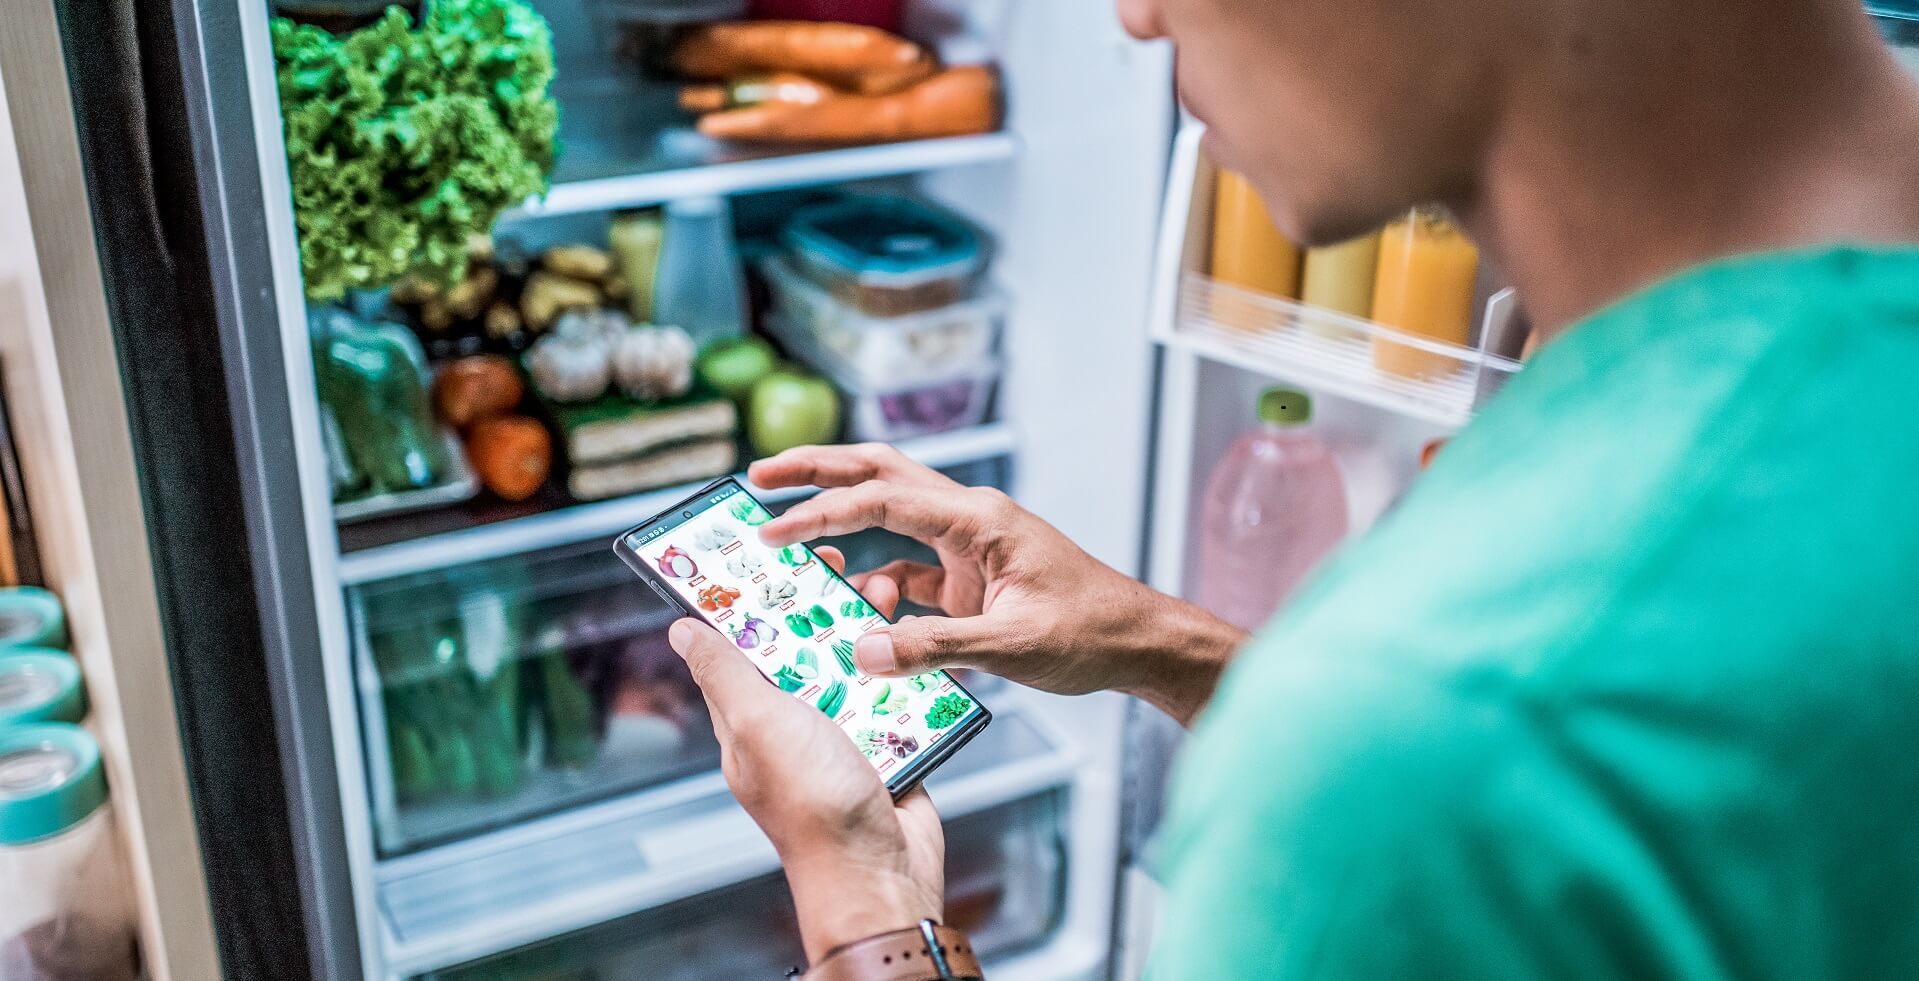 Refrigerator filled with fruits and vegetables, in front of it a man with a smartphone looking for new vegetables